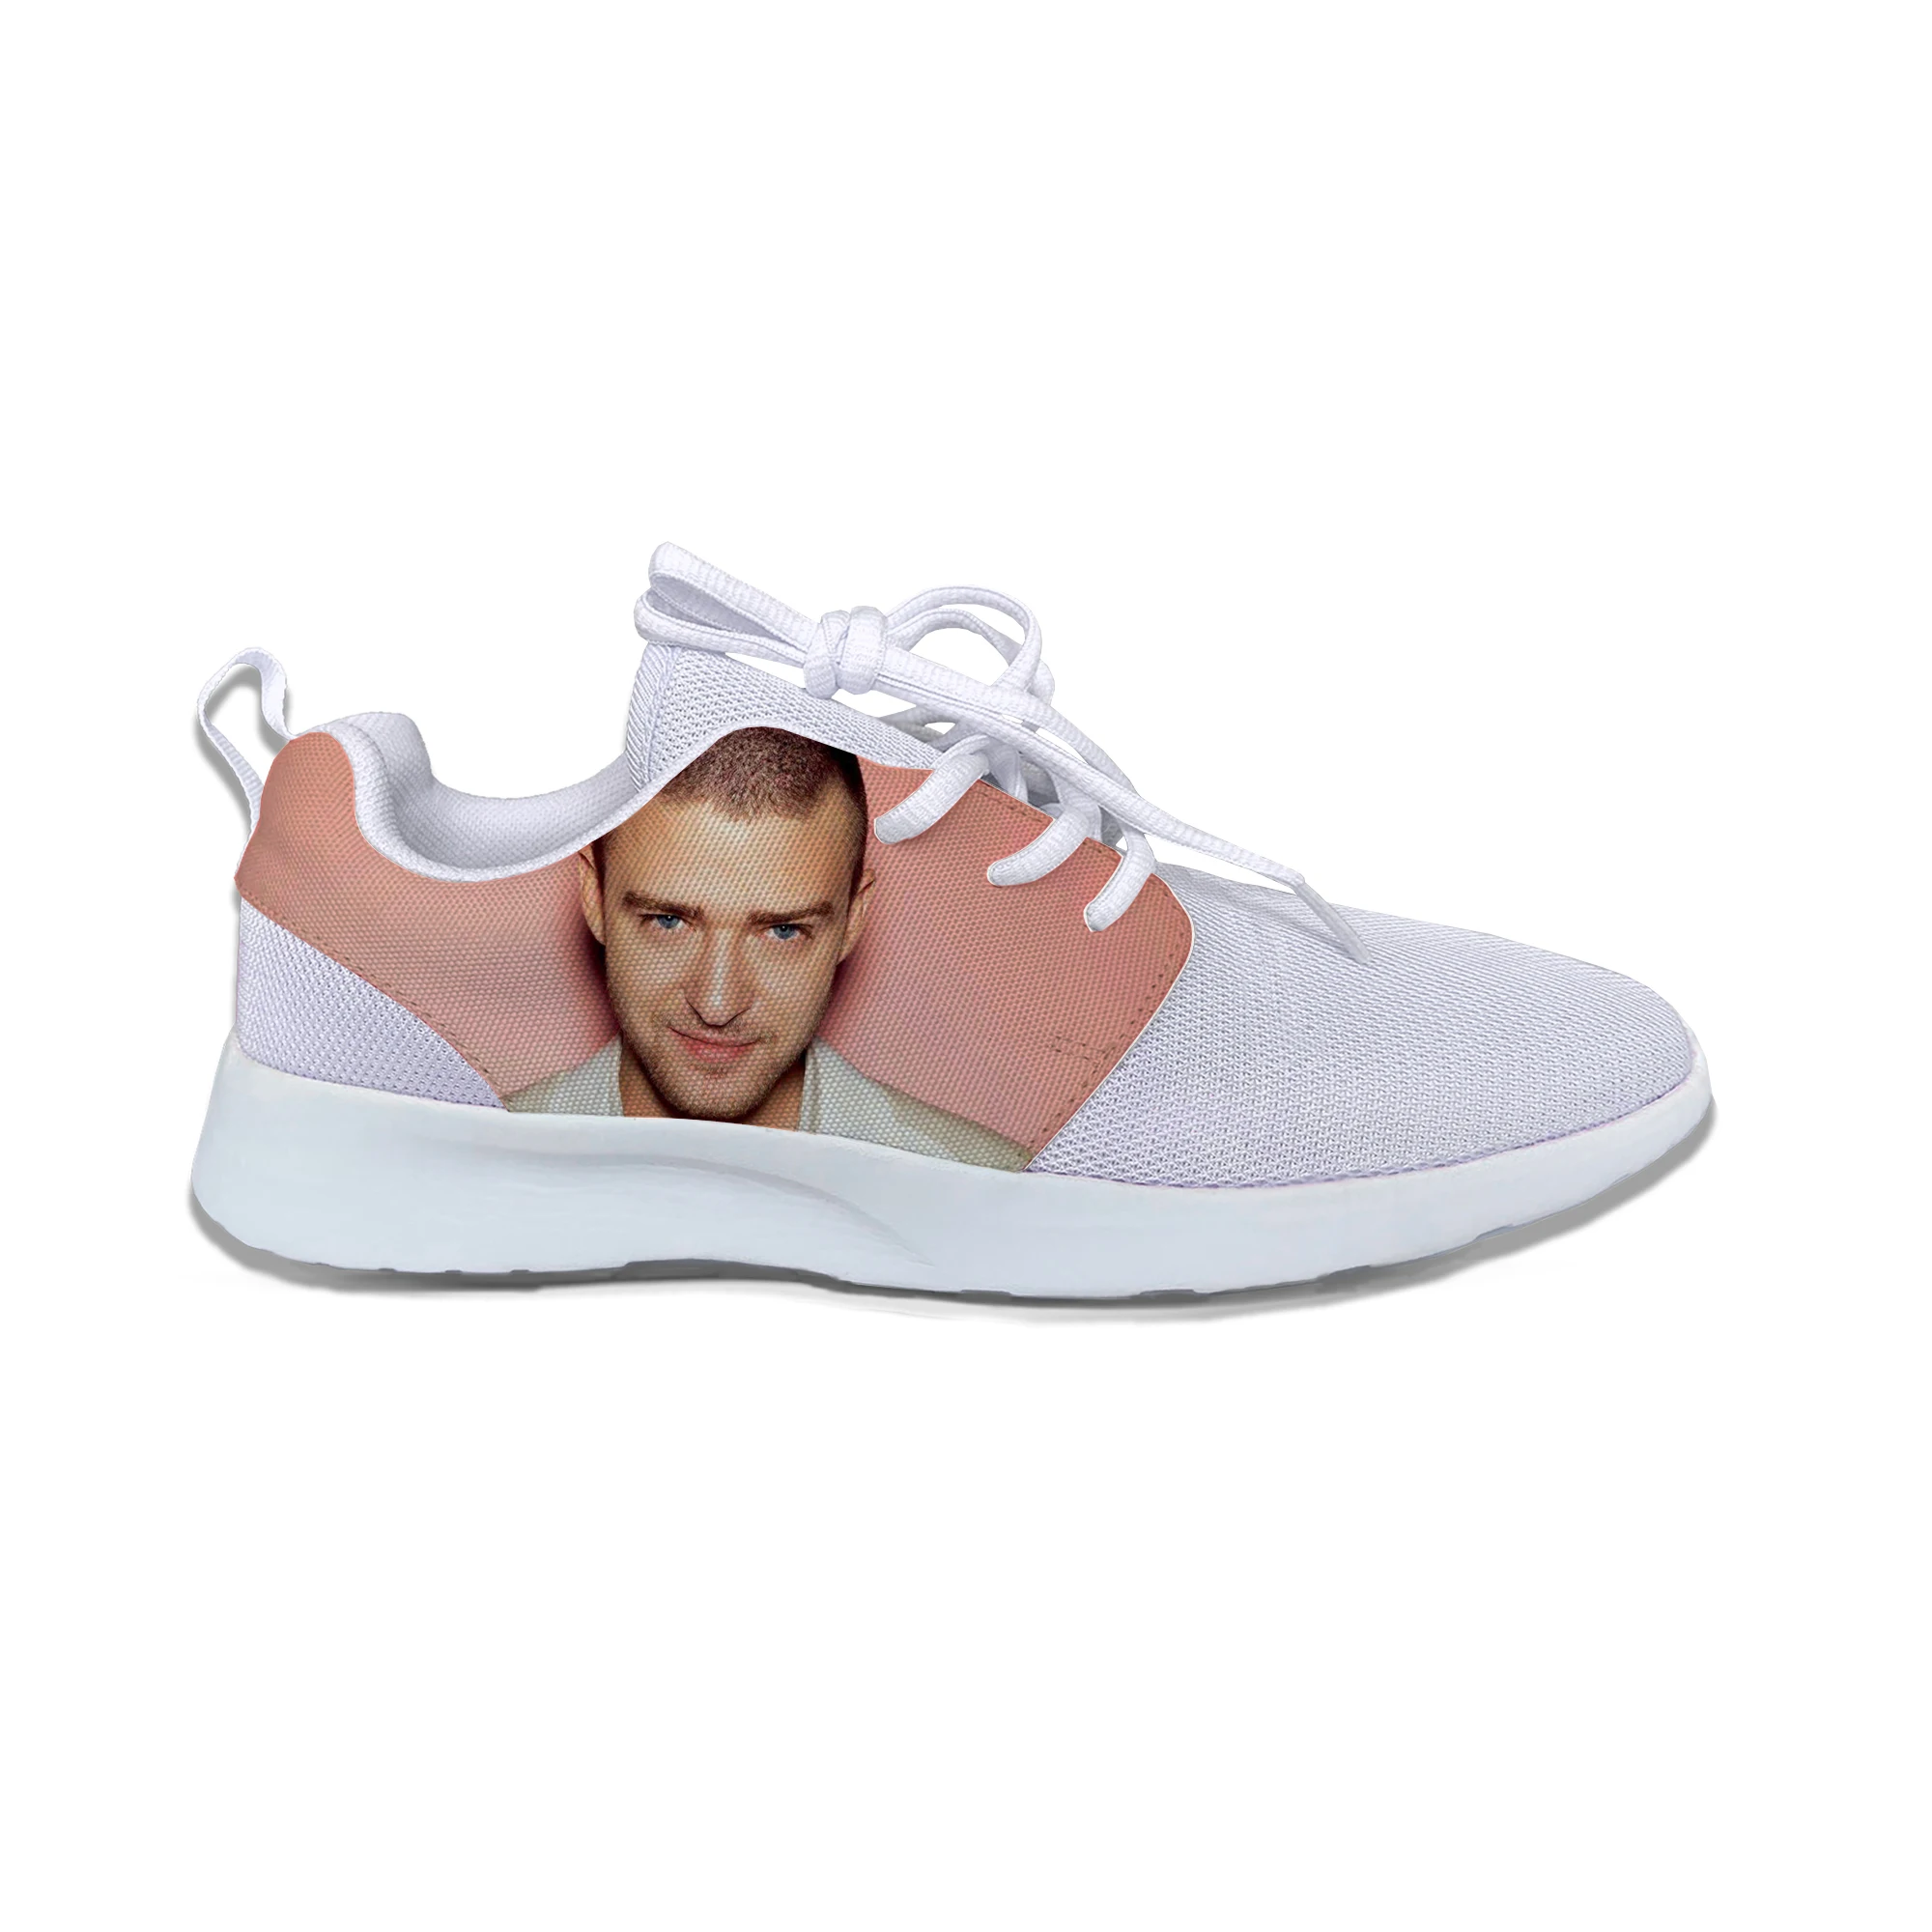 

Hot Justin Timberlake Eminem Shoes Men Woman Hip Hop Eminem Lightweight Leisure Running Shoes Breathable Sports Shoes Sneakers